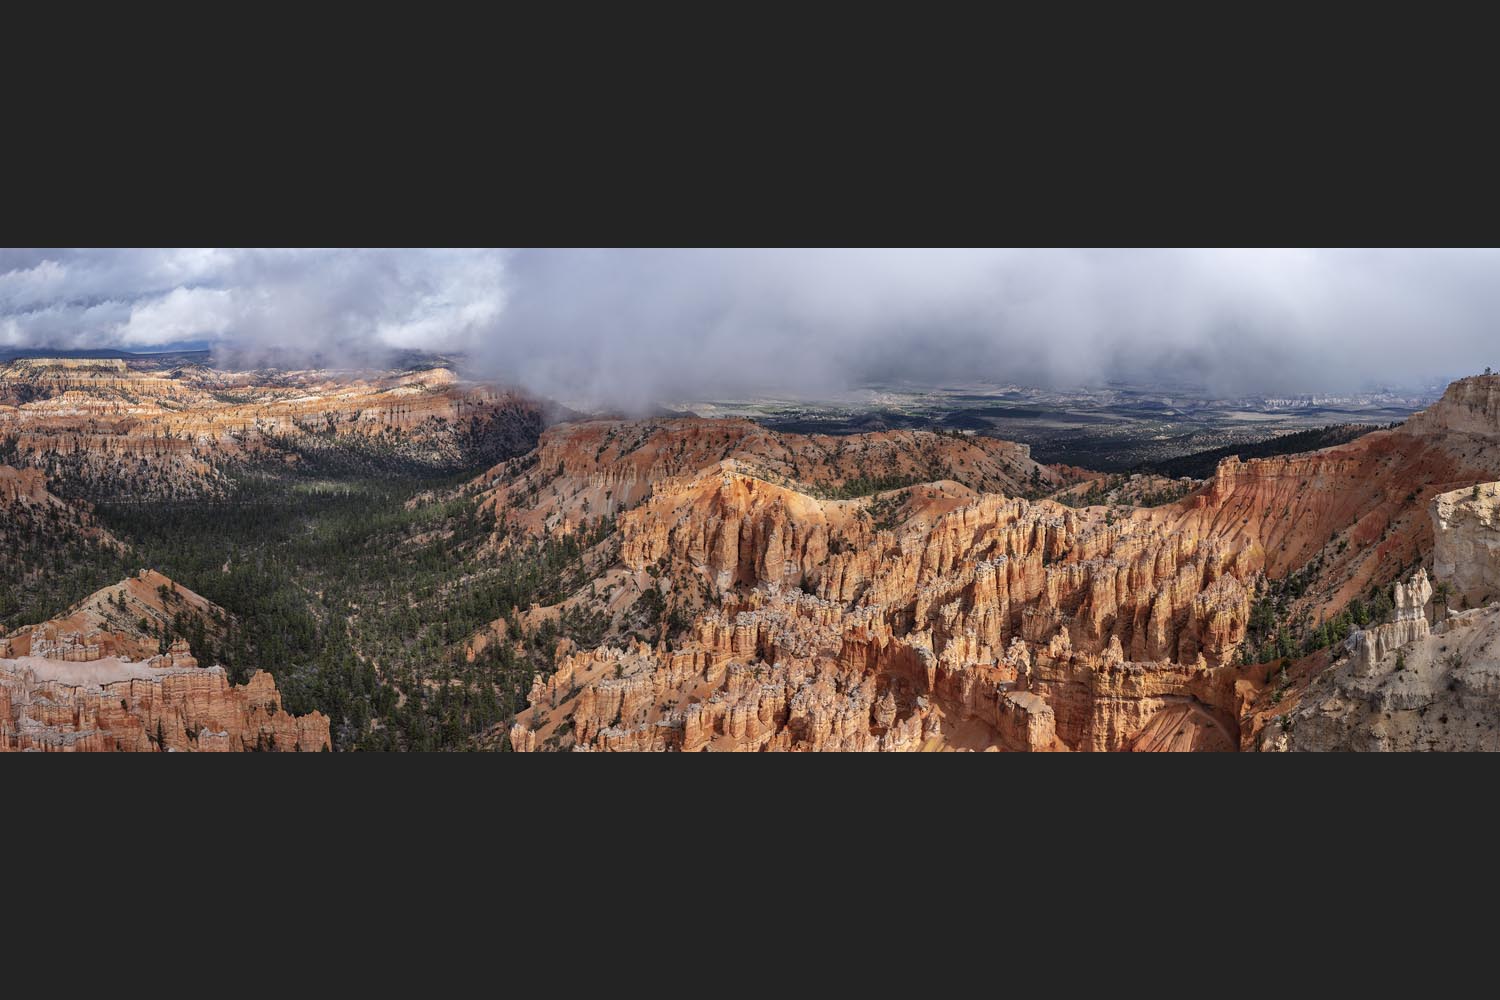 Steve Sucsy: Bryce Canyon in Sun and Fog - Bryce National Park, Utah